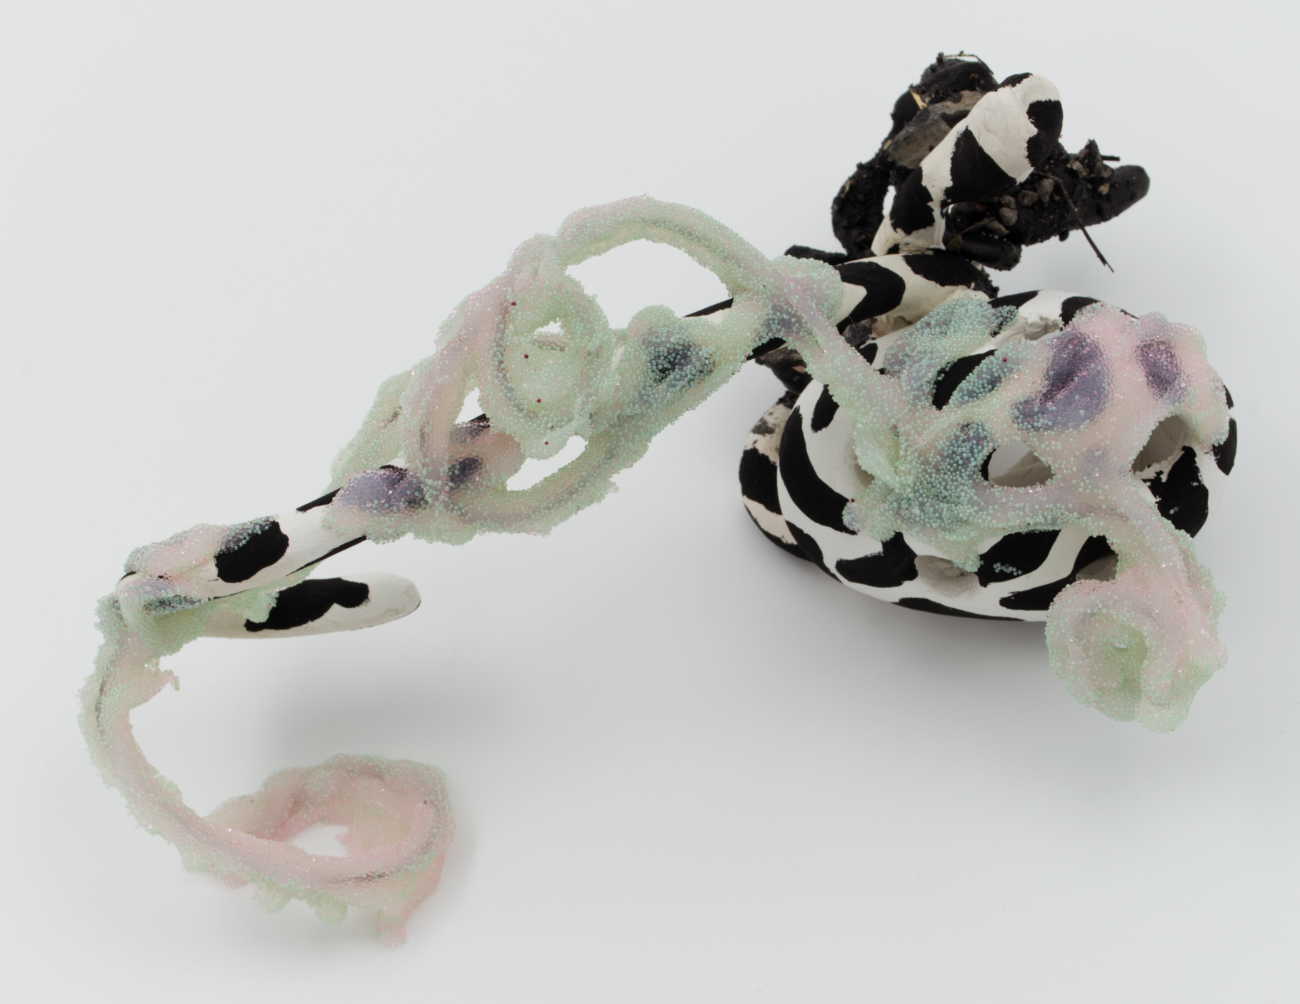 Devious Frequency 11, 2022: silicone, stoneware, air-dry clay, glass, pva, acrylic paint, dirt, rocks, grass, 8 inches x 4 inches x 4 inches